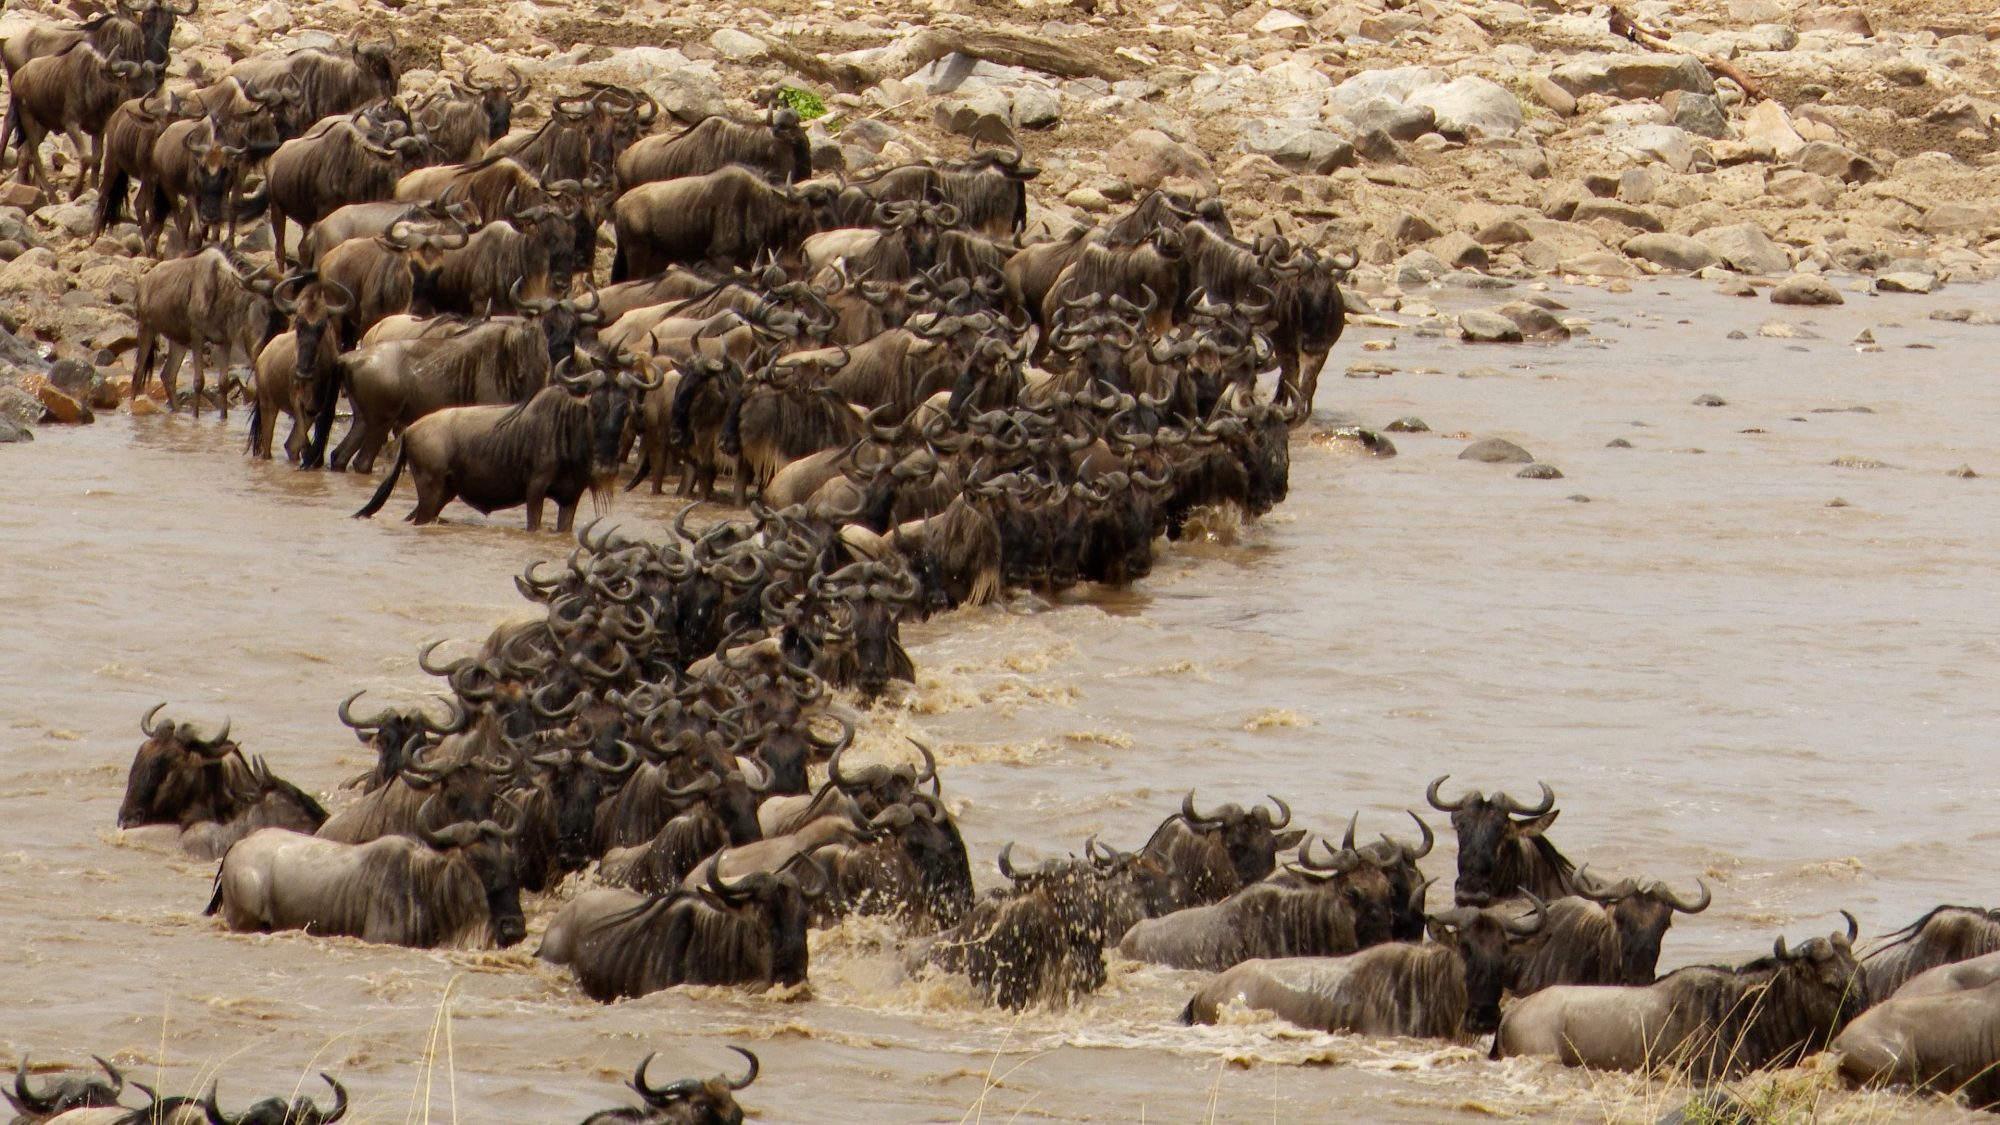 Amazing wild life spectacle: the great Wildebeest migration – Tanzania, 2019